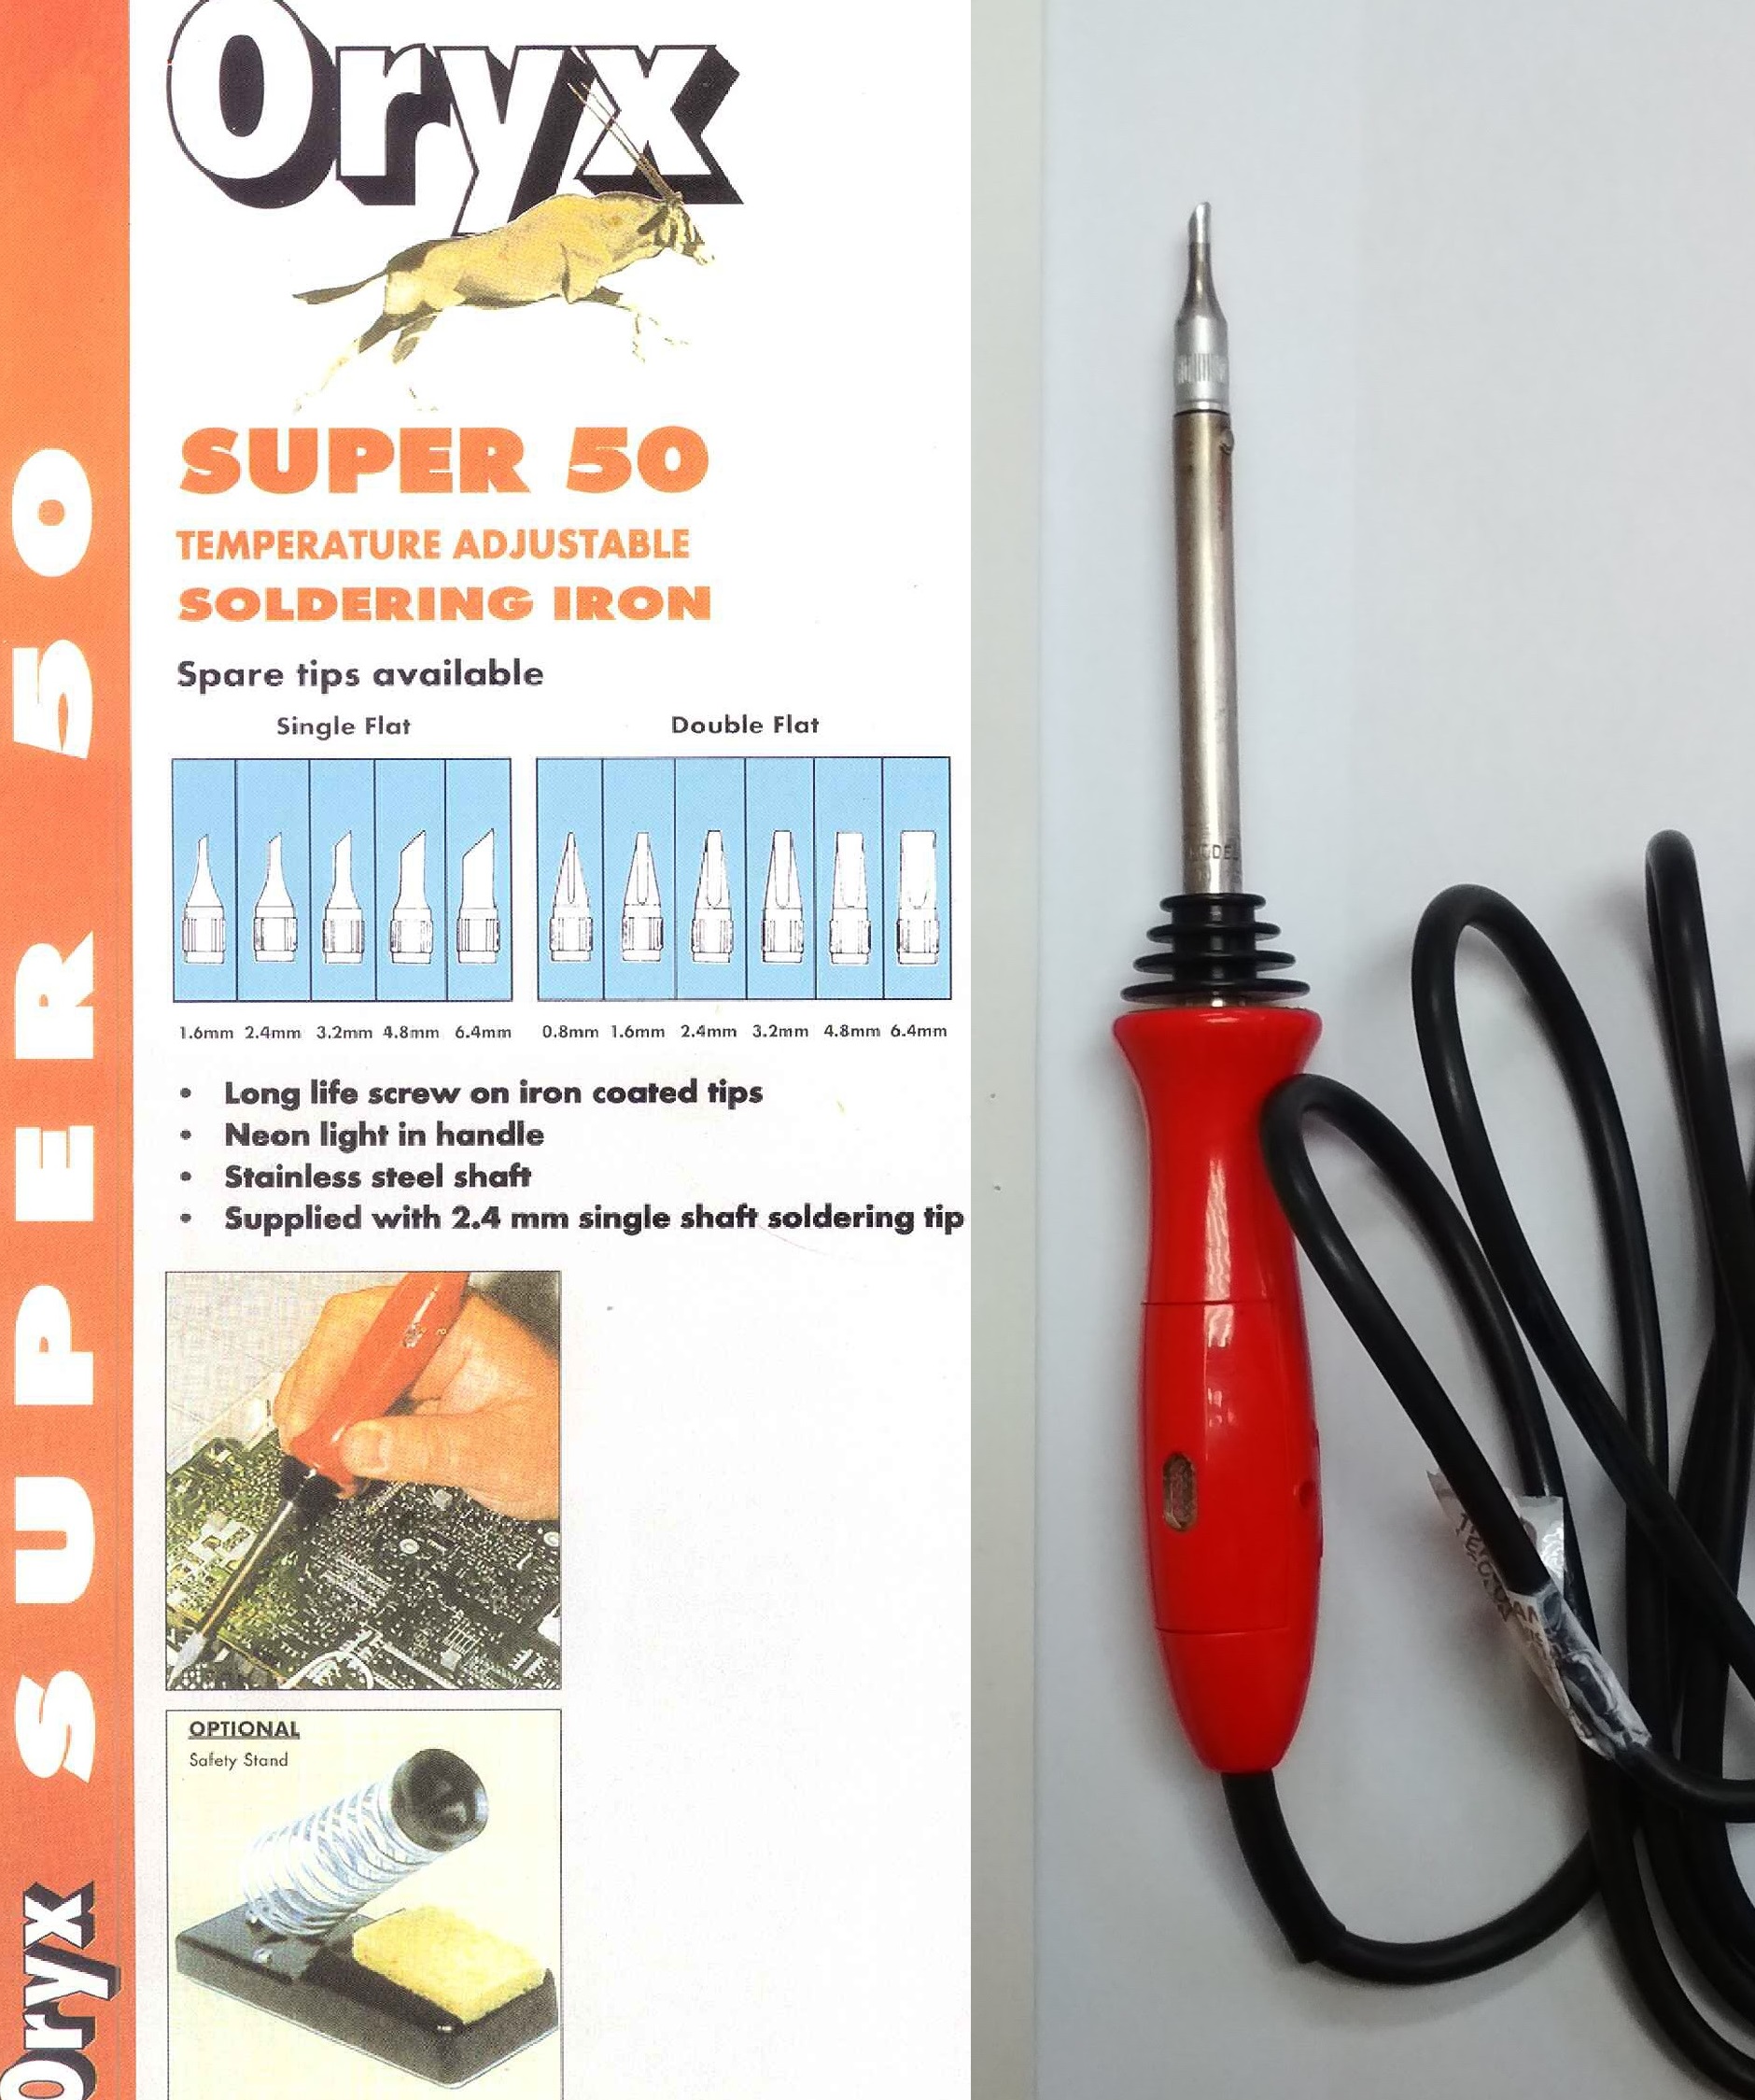 ORYX Oryx 50 Temperature controlled soldering iron